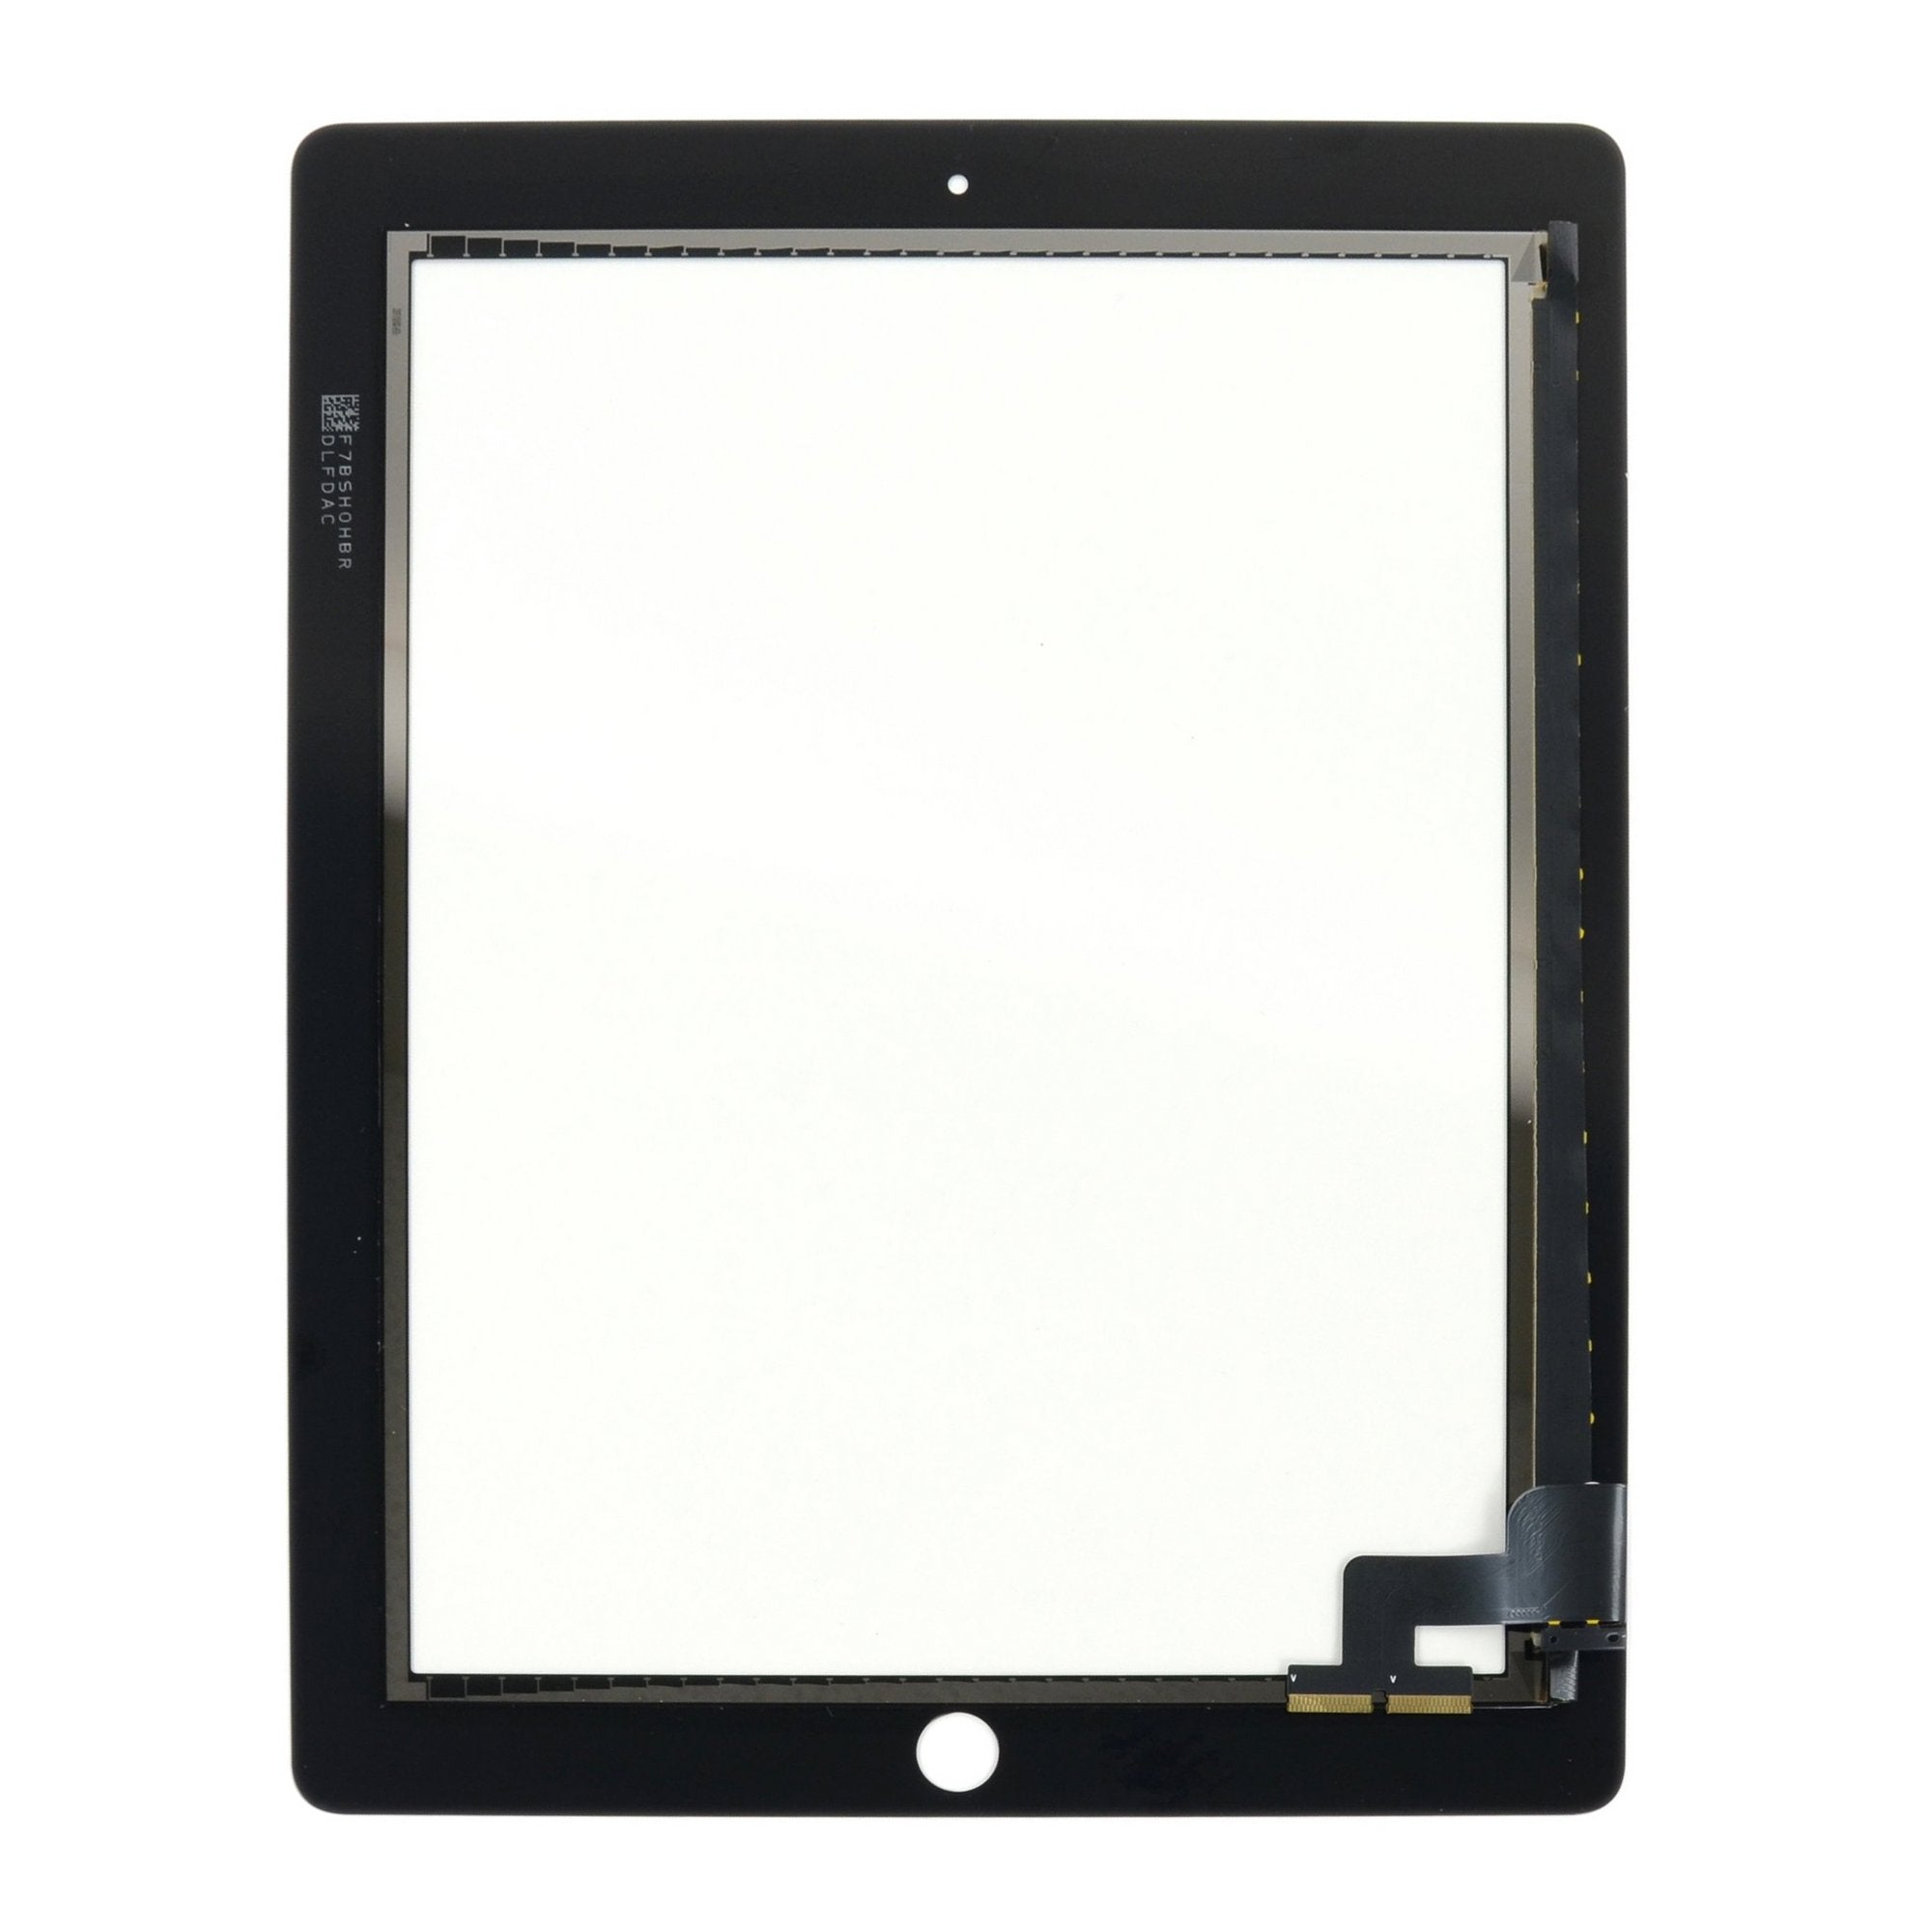 iPad 2 Screen Digitizer Black New Part Only